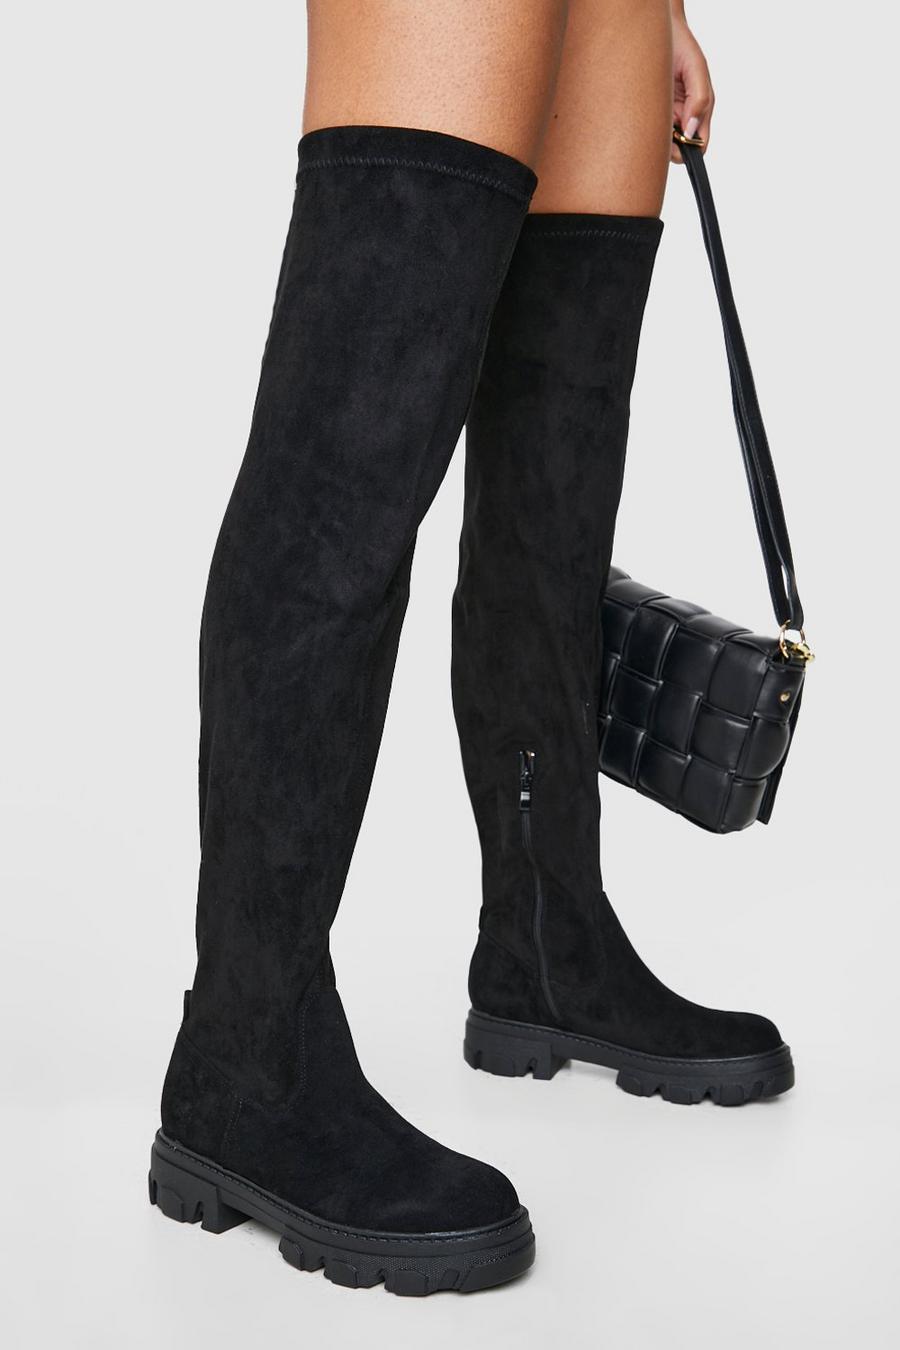 Black Wide Fit Chunky Sole Over The Knee Boots